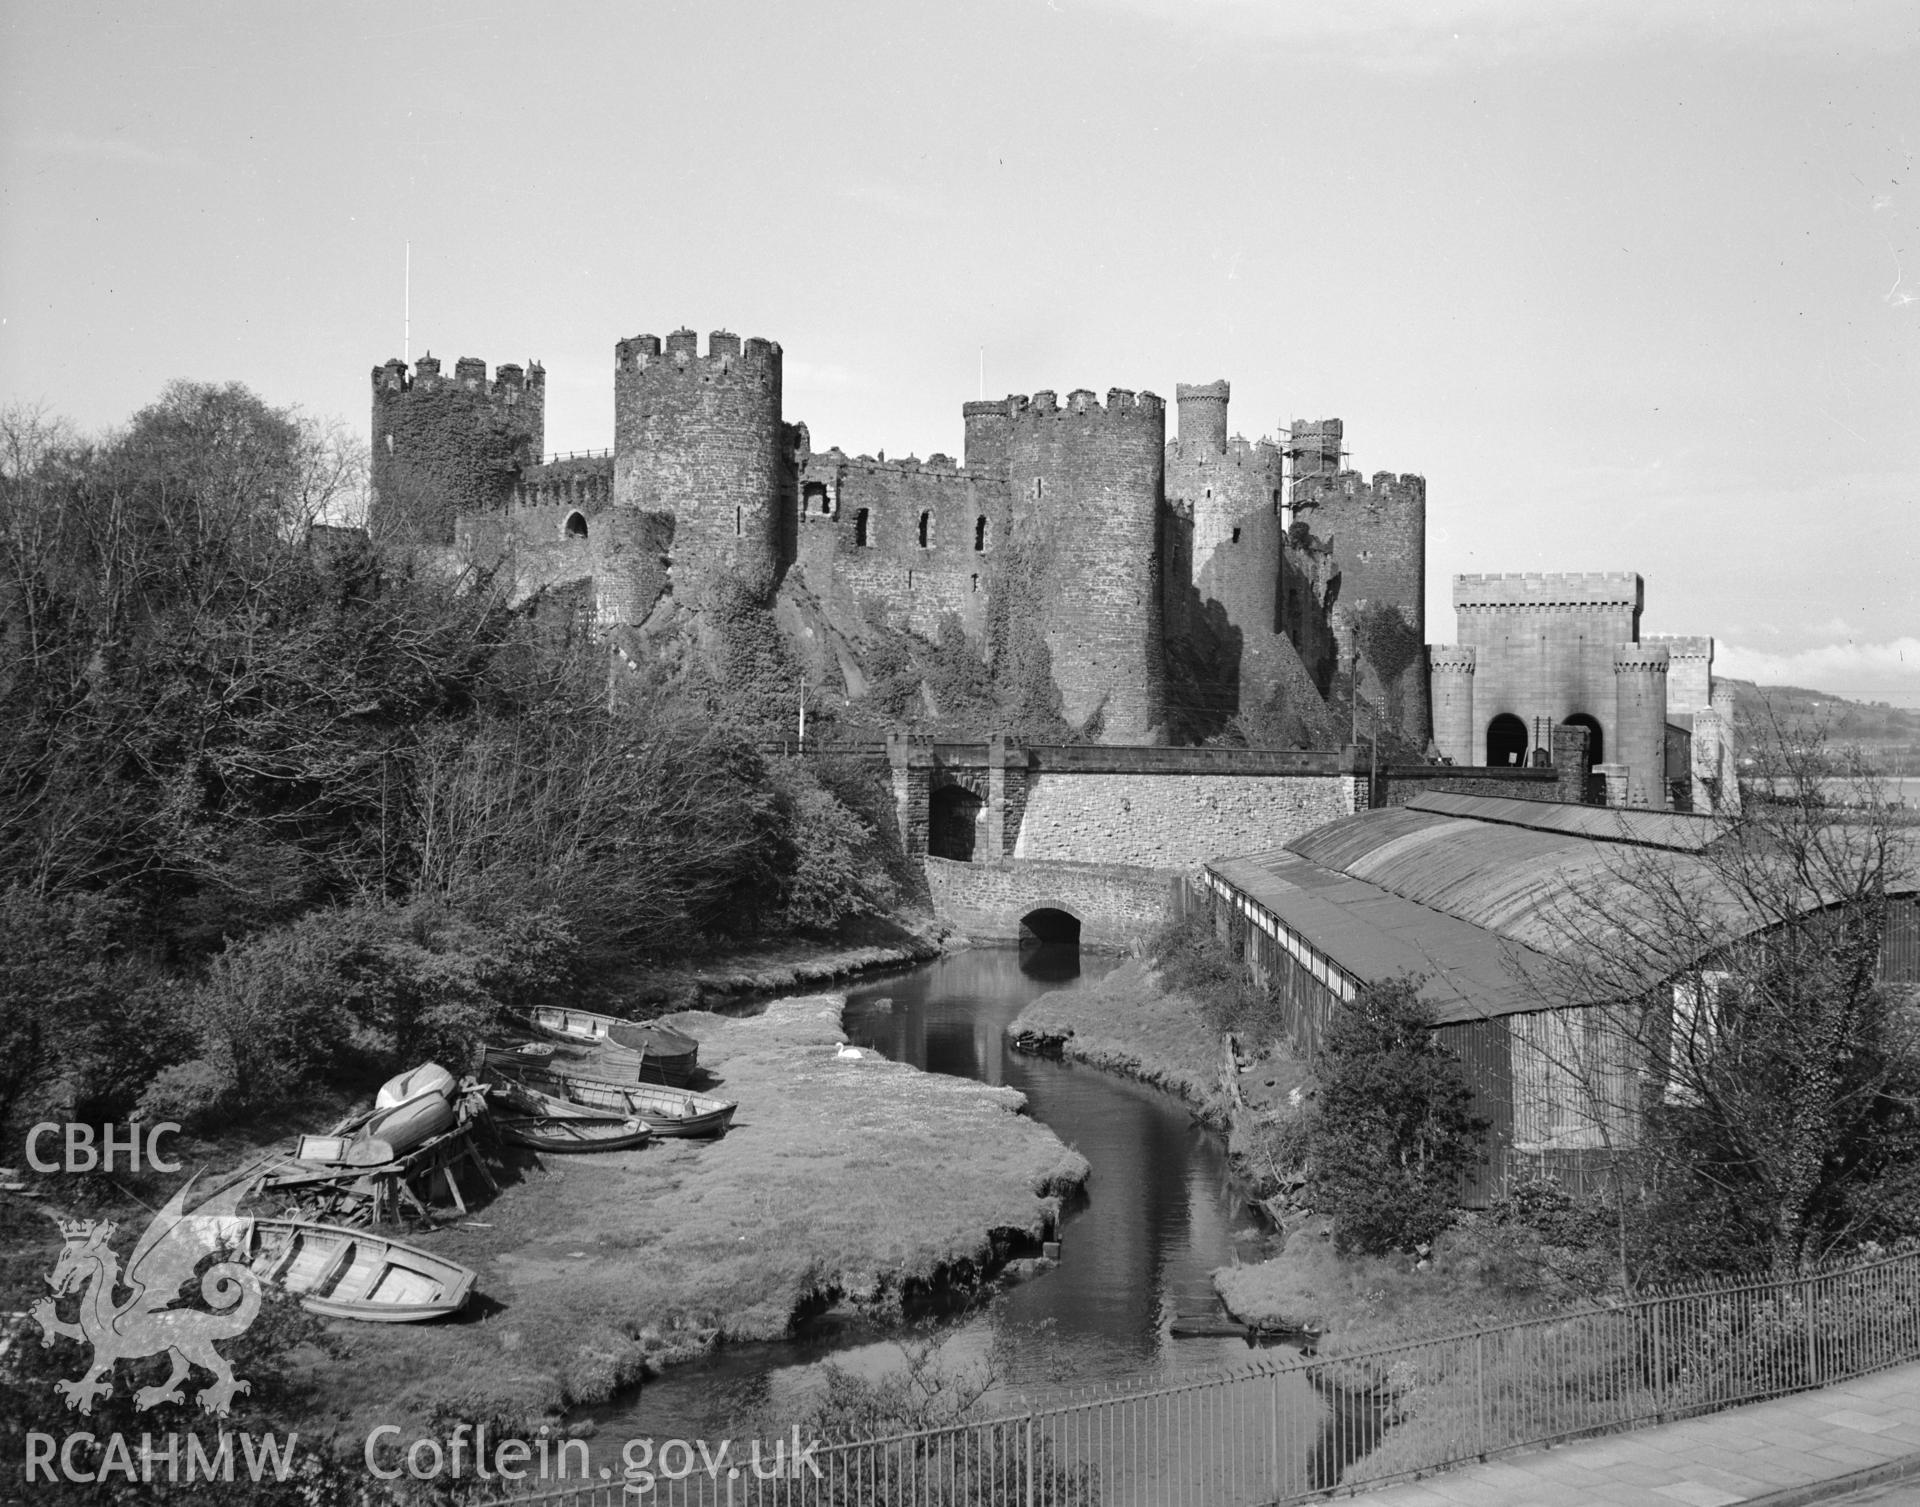 Exterior view of Conwy Castle, taken in 10.09.1951.